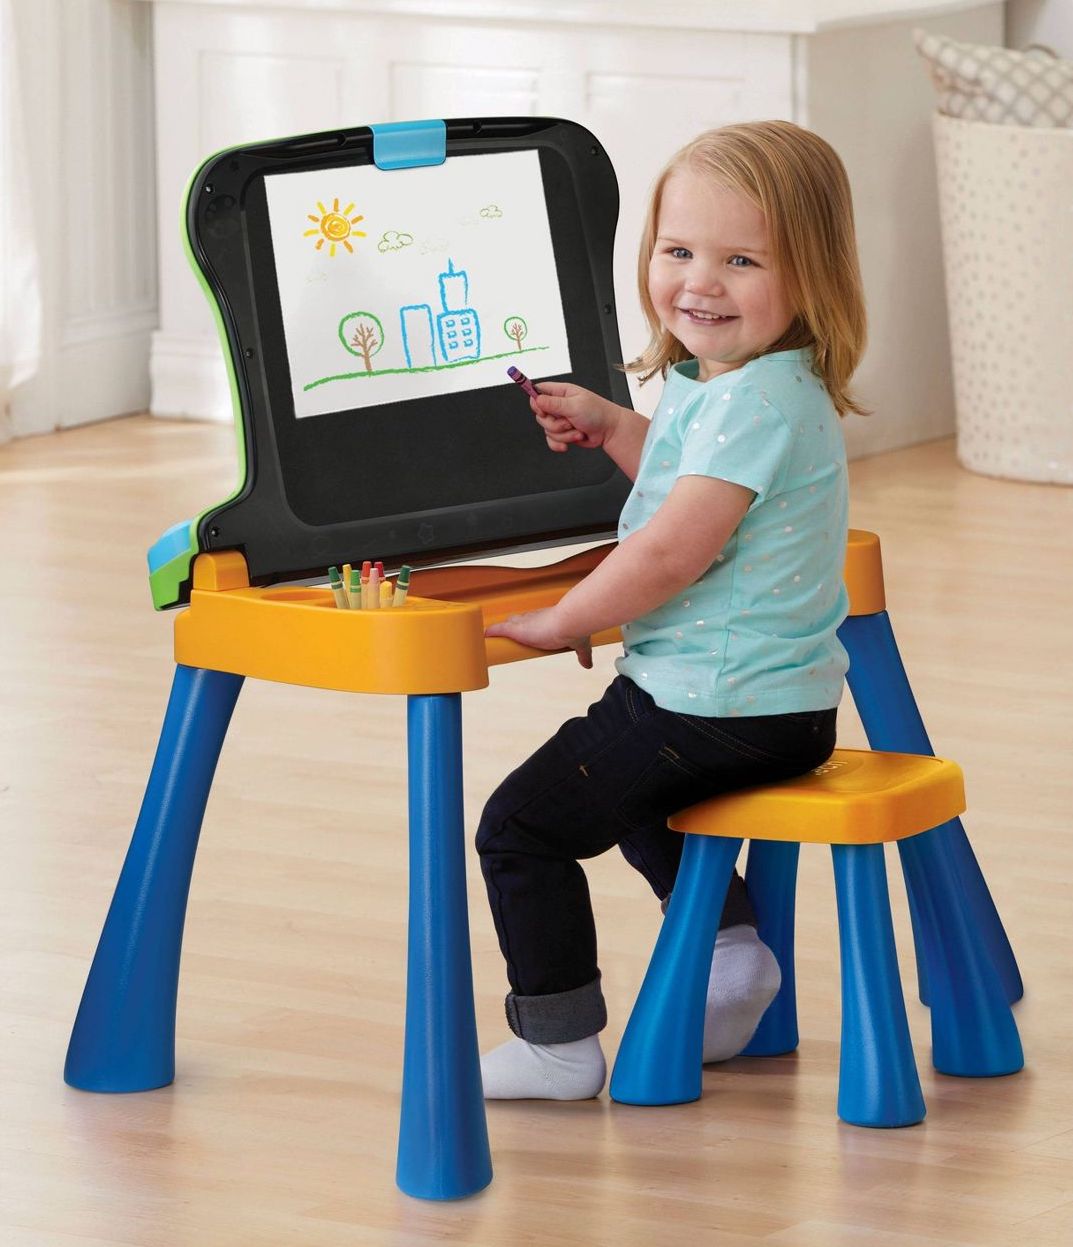 NEW VTech Explore and Write Activity Desk Transforms into Easel and Chalkboard 